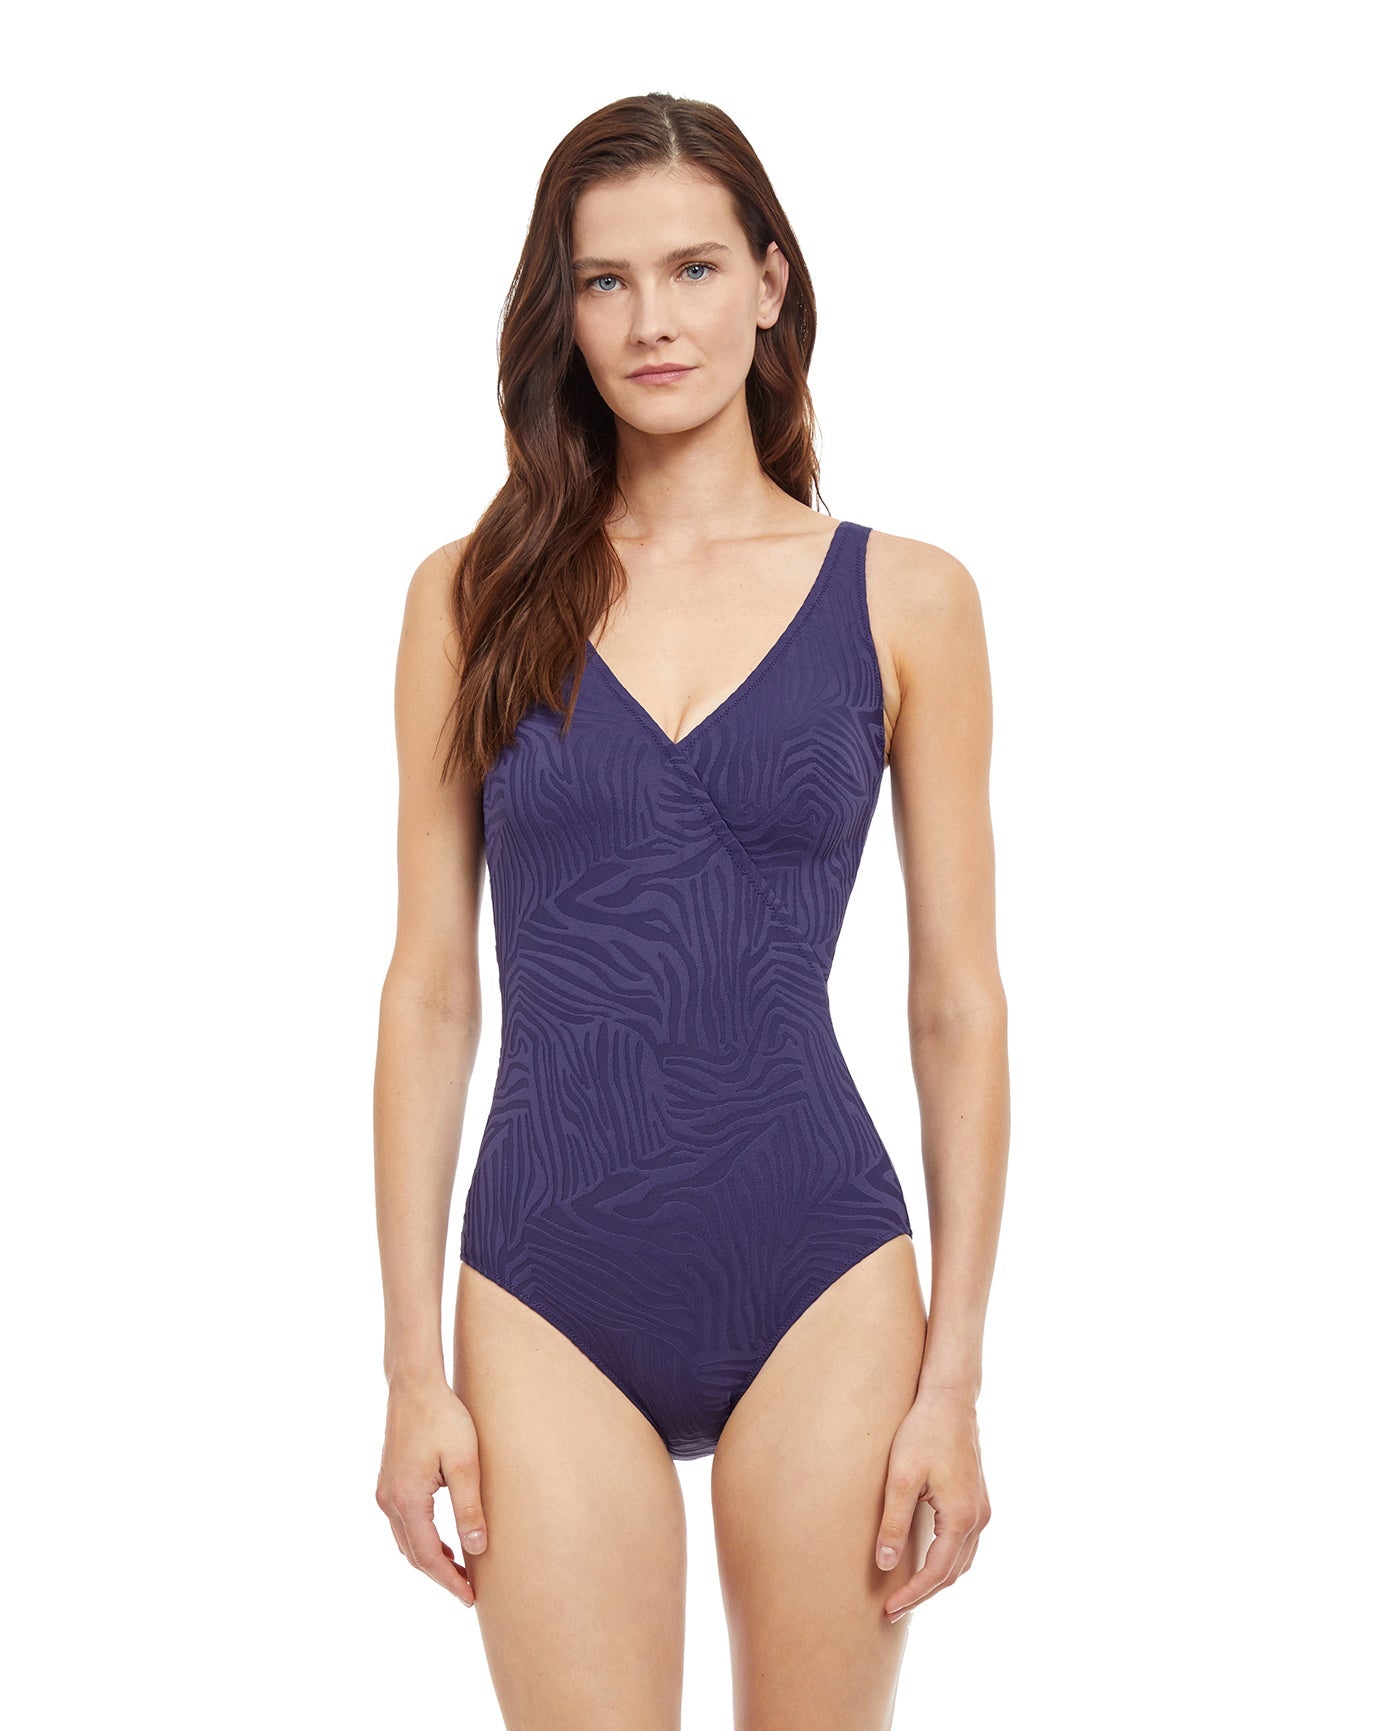 Gottex African Escape Full Coverage V-Neck Surplice One Piece Swimsuit